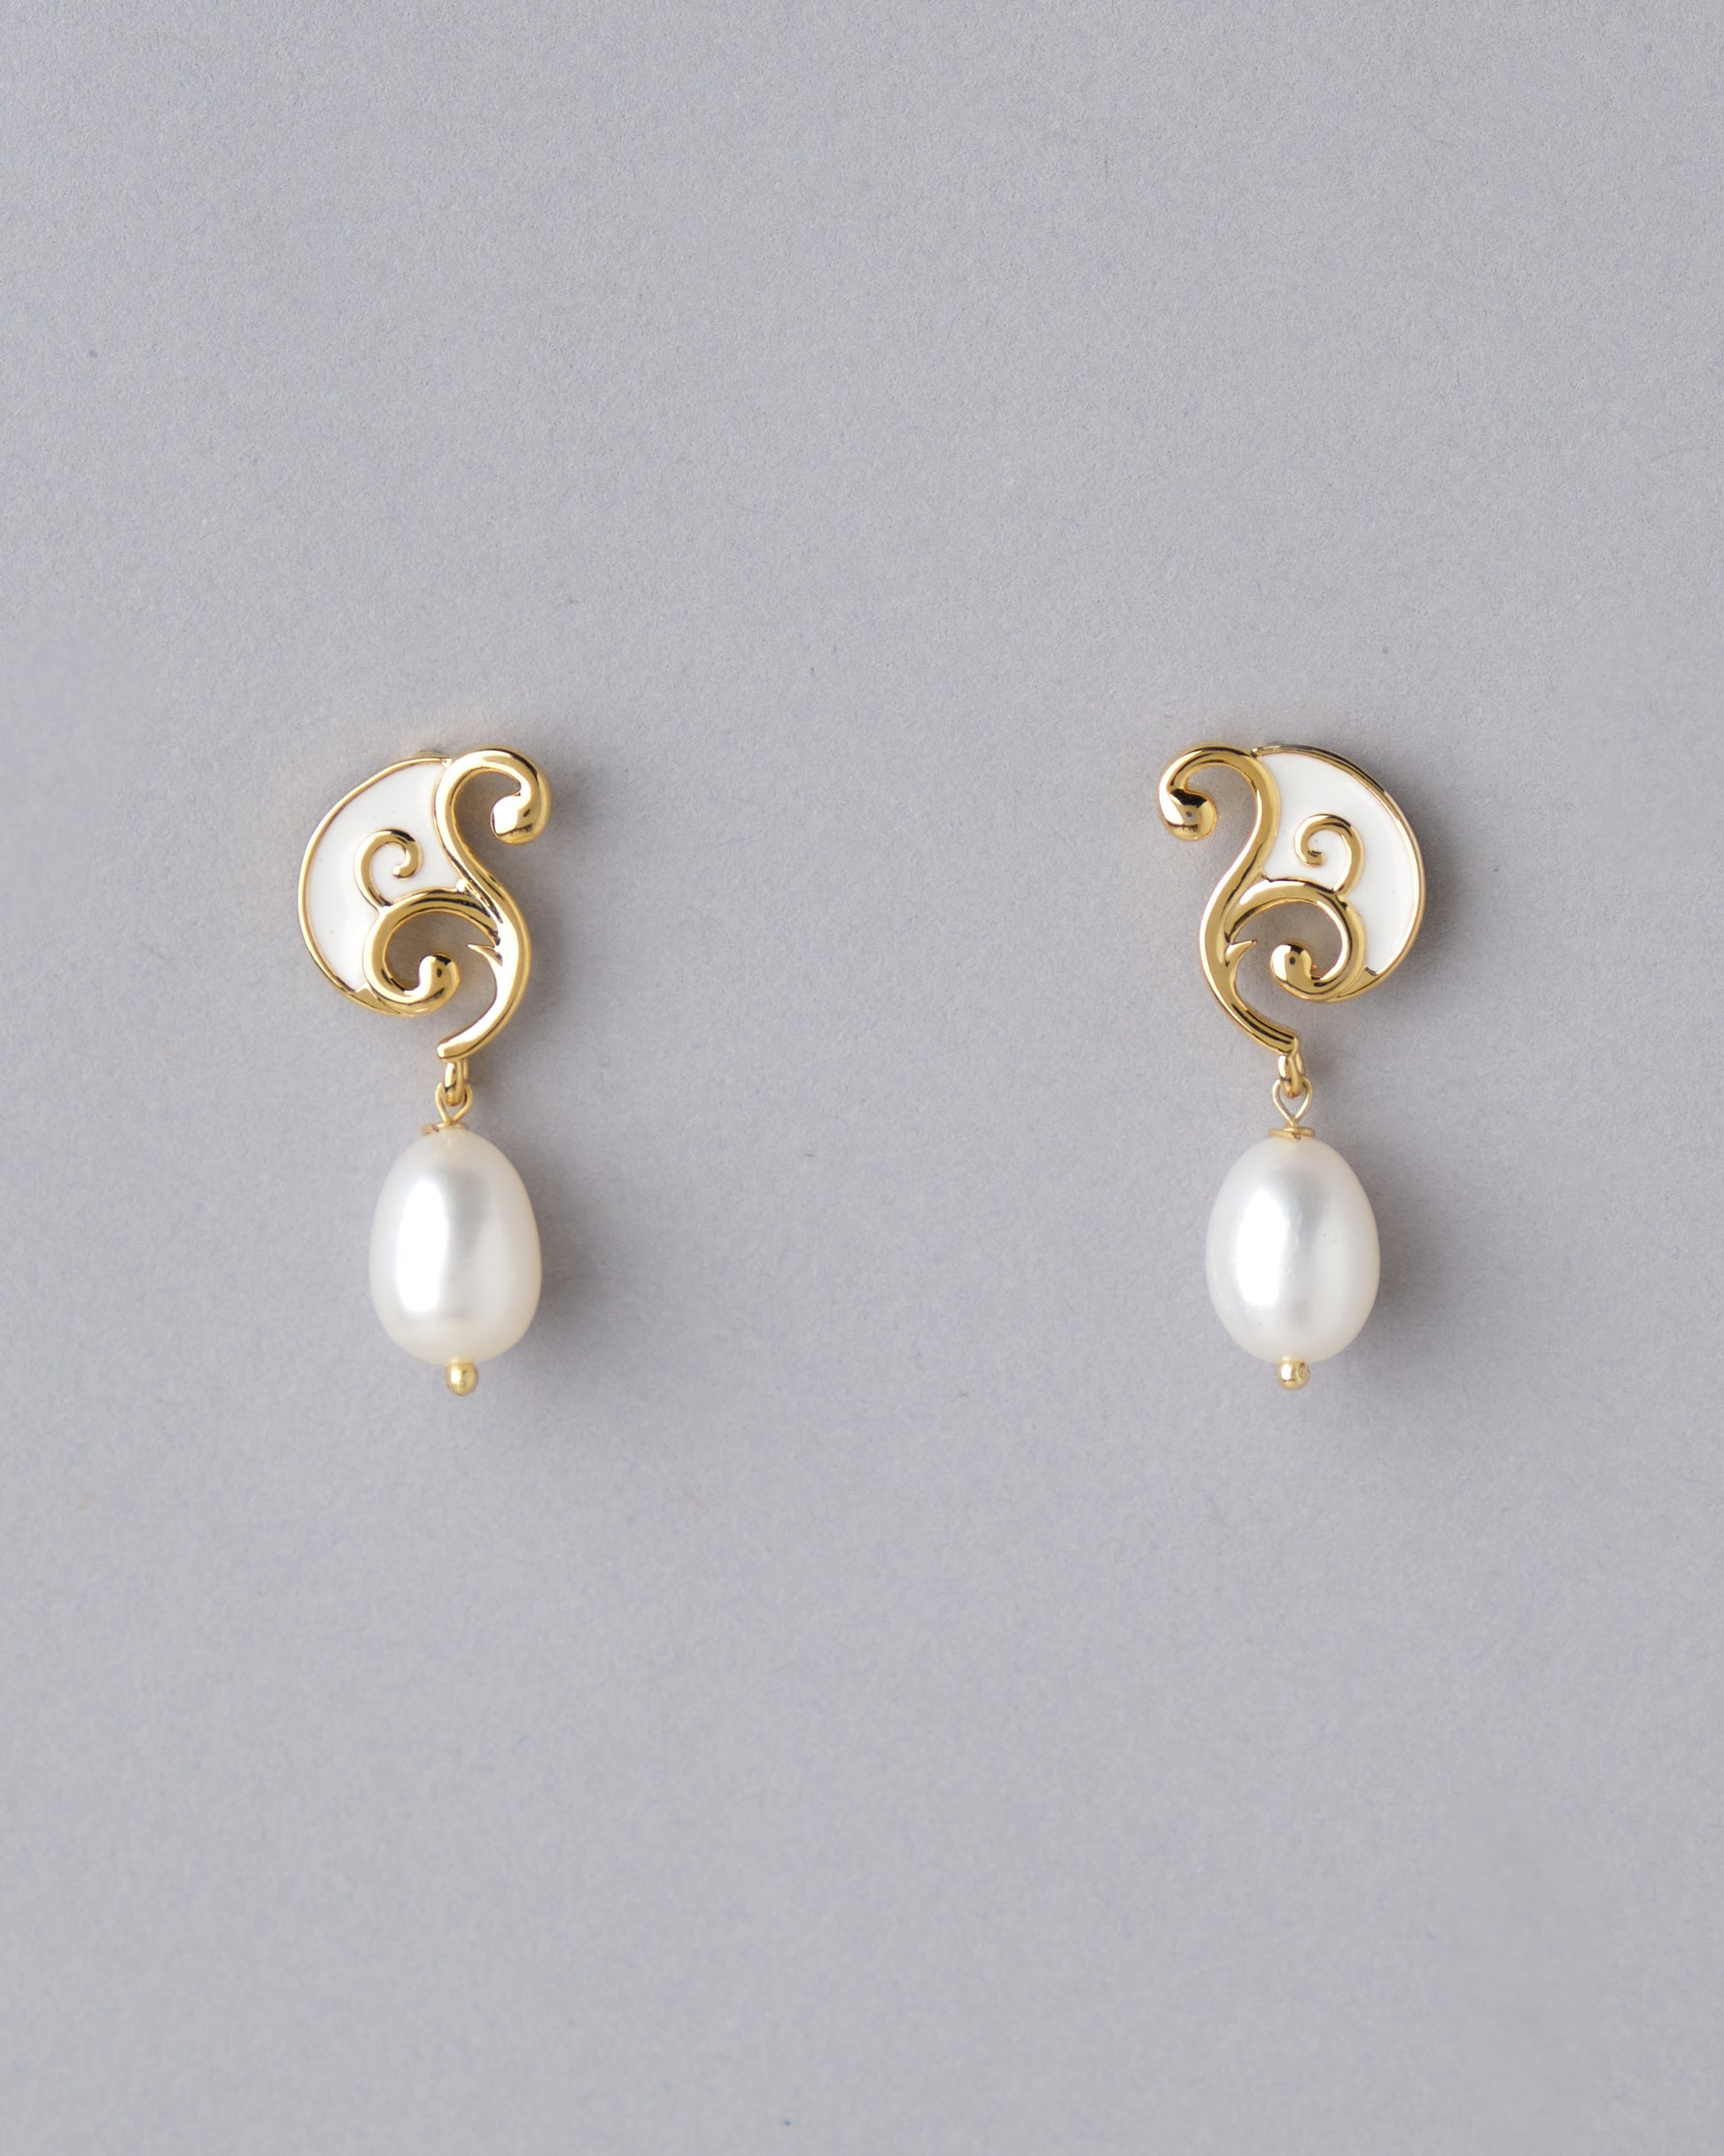 A pair of Chandrani Pearls Sophisticated Dainty Pearl Drop Earrings.